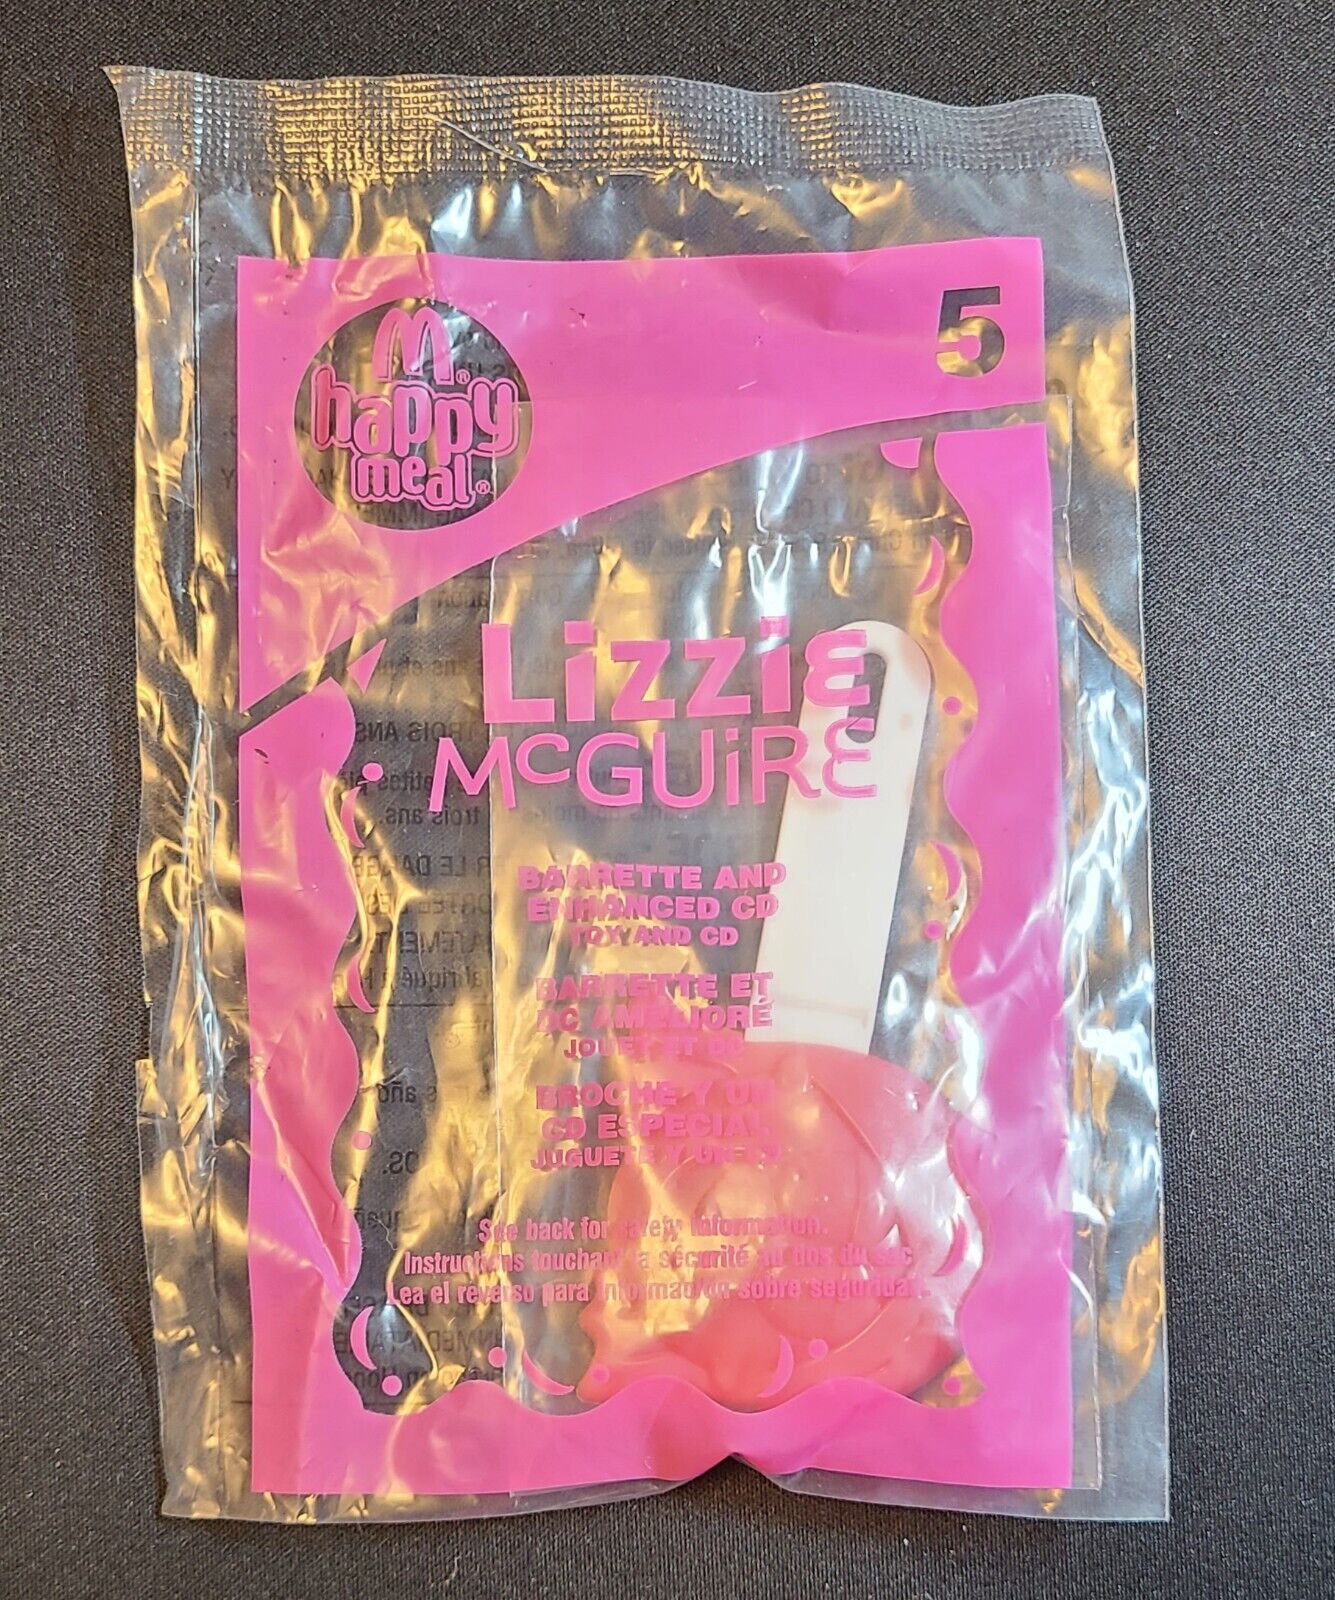 LIZZIE MCGUIRE 2004 McDonalds Happy Meal Disney Sealed Toy 5 Misc Toy - Hobby Gems